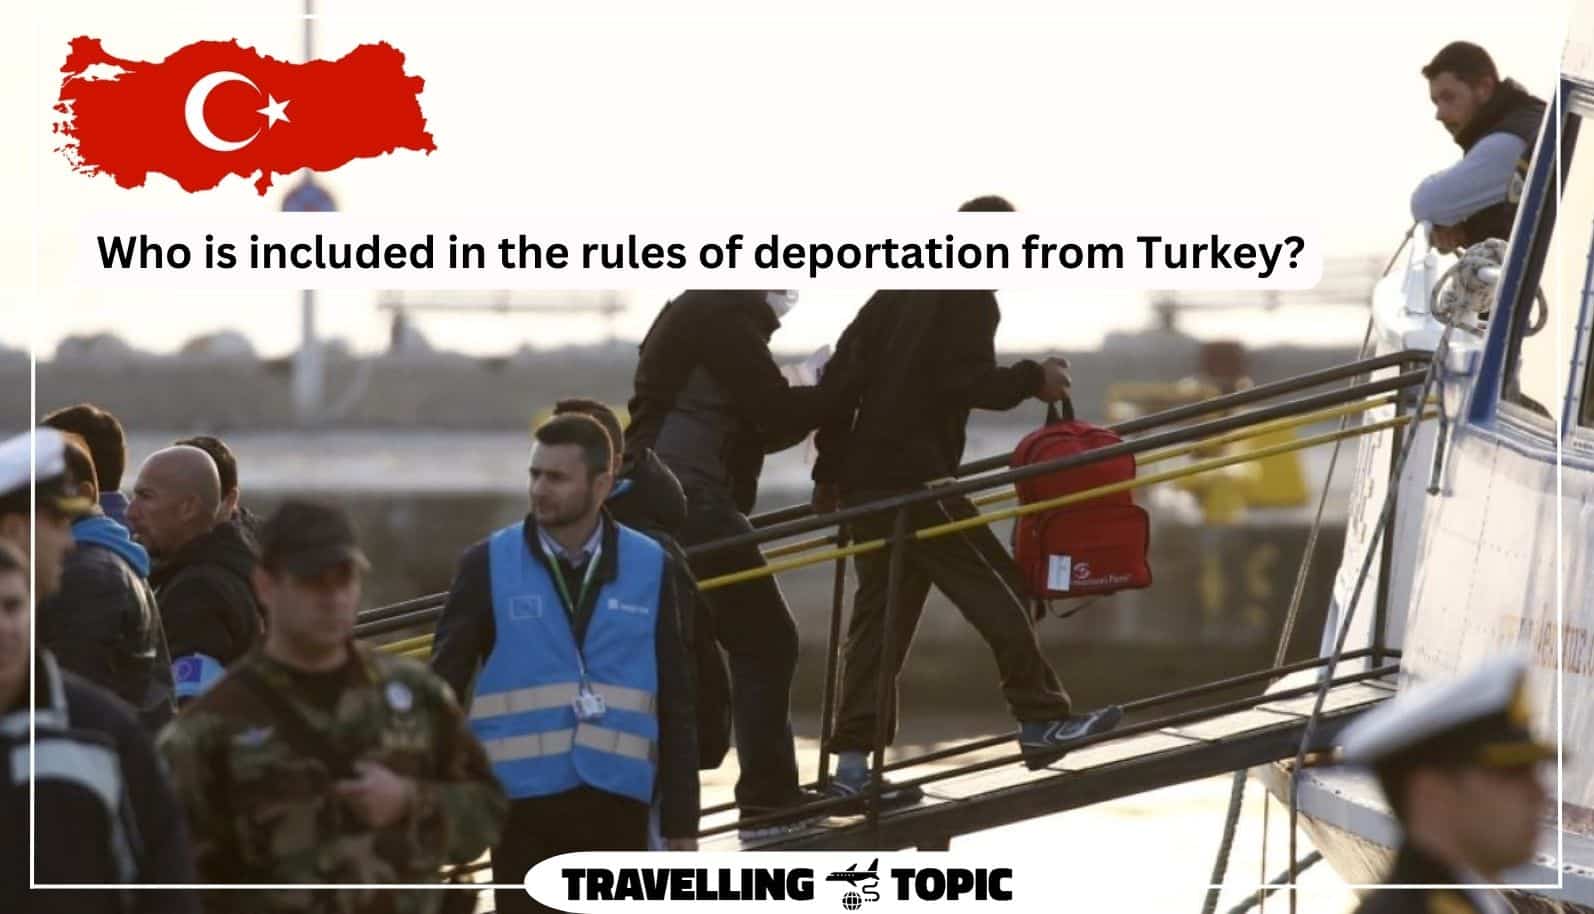 Who is included in the rules of deportation from Turkey